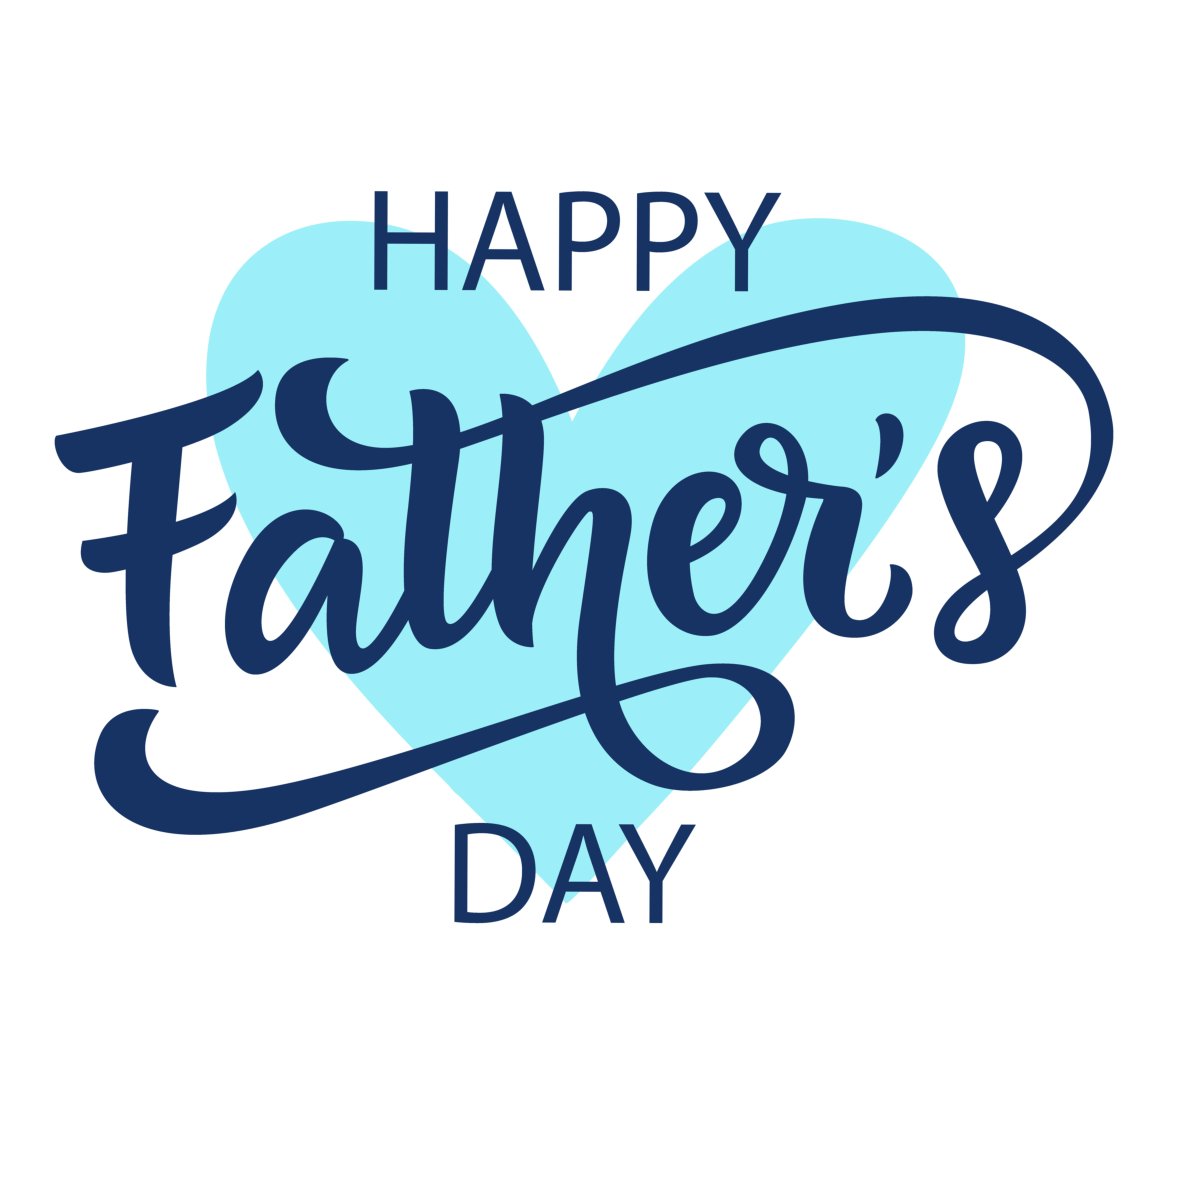 Show Your Appreciation

Celebrate Father's Day by showing your appreciation for all the dads out there! Take some time to connect with your dad and let your father know how much he means to you.

#PharmacyServices #HudsonFL #FathersDay